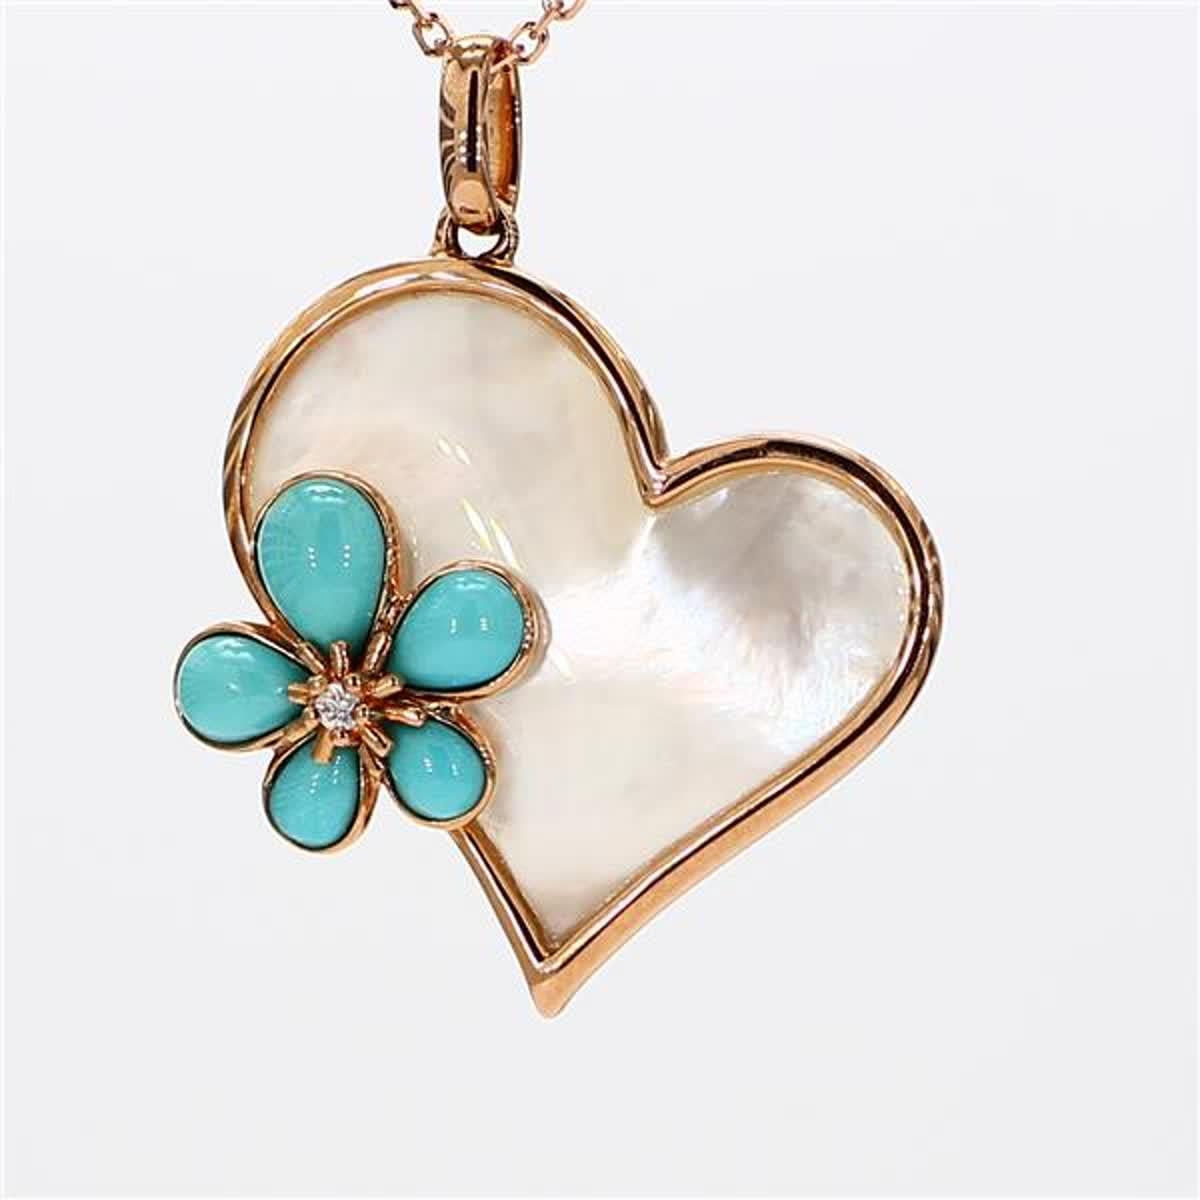 RareGemWorld's classic turquoise and pearl pendant. Mounted in a beautiful 18K Rose Gold setting with flower shaped natural turquoise and a heart shape natural pearl. This pendant is guaranteed to impress and enhance your personal collection!

Total